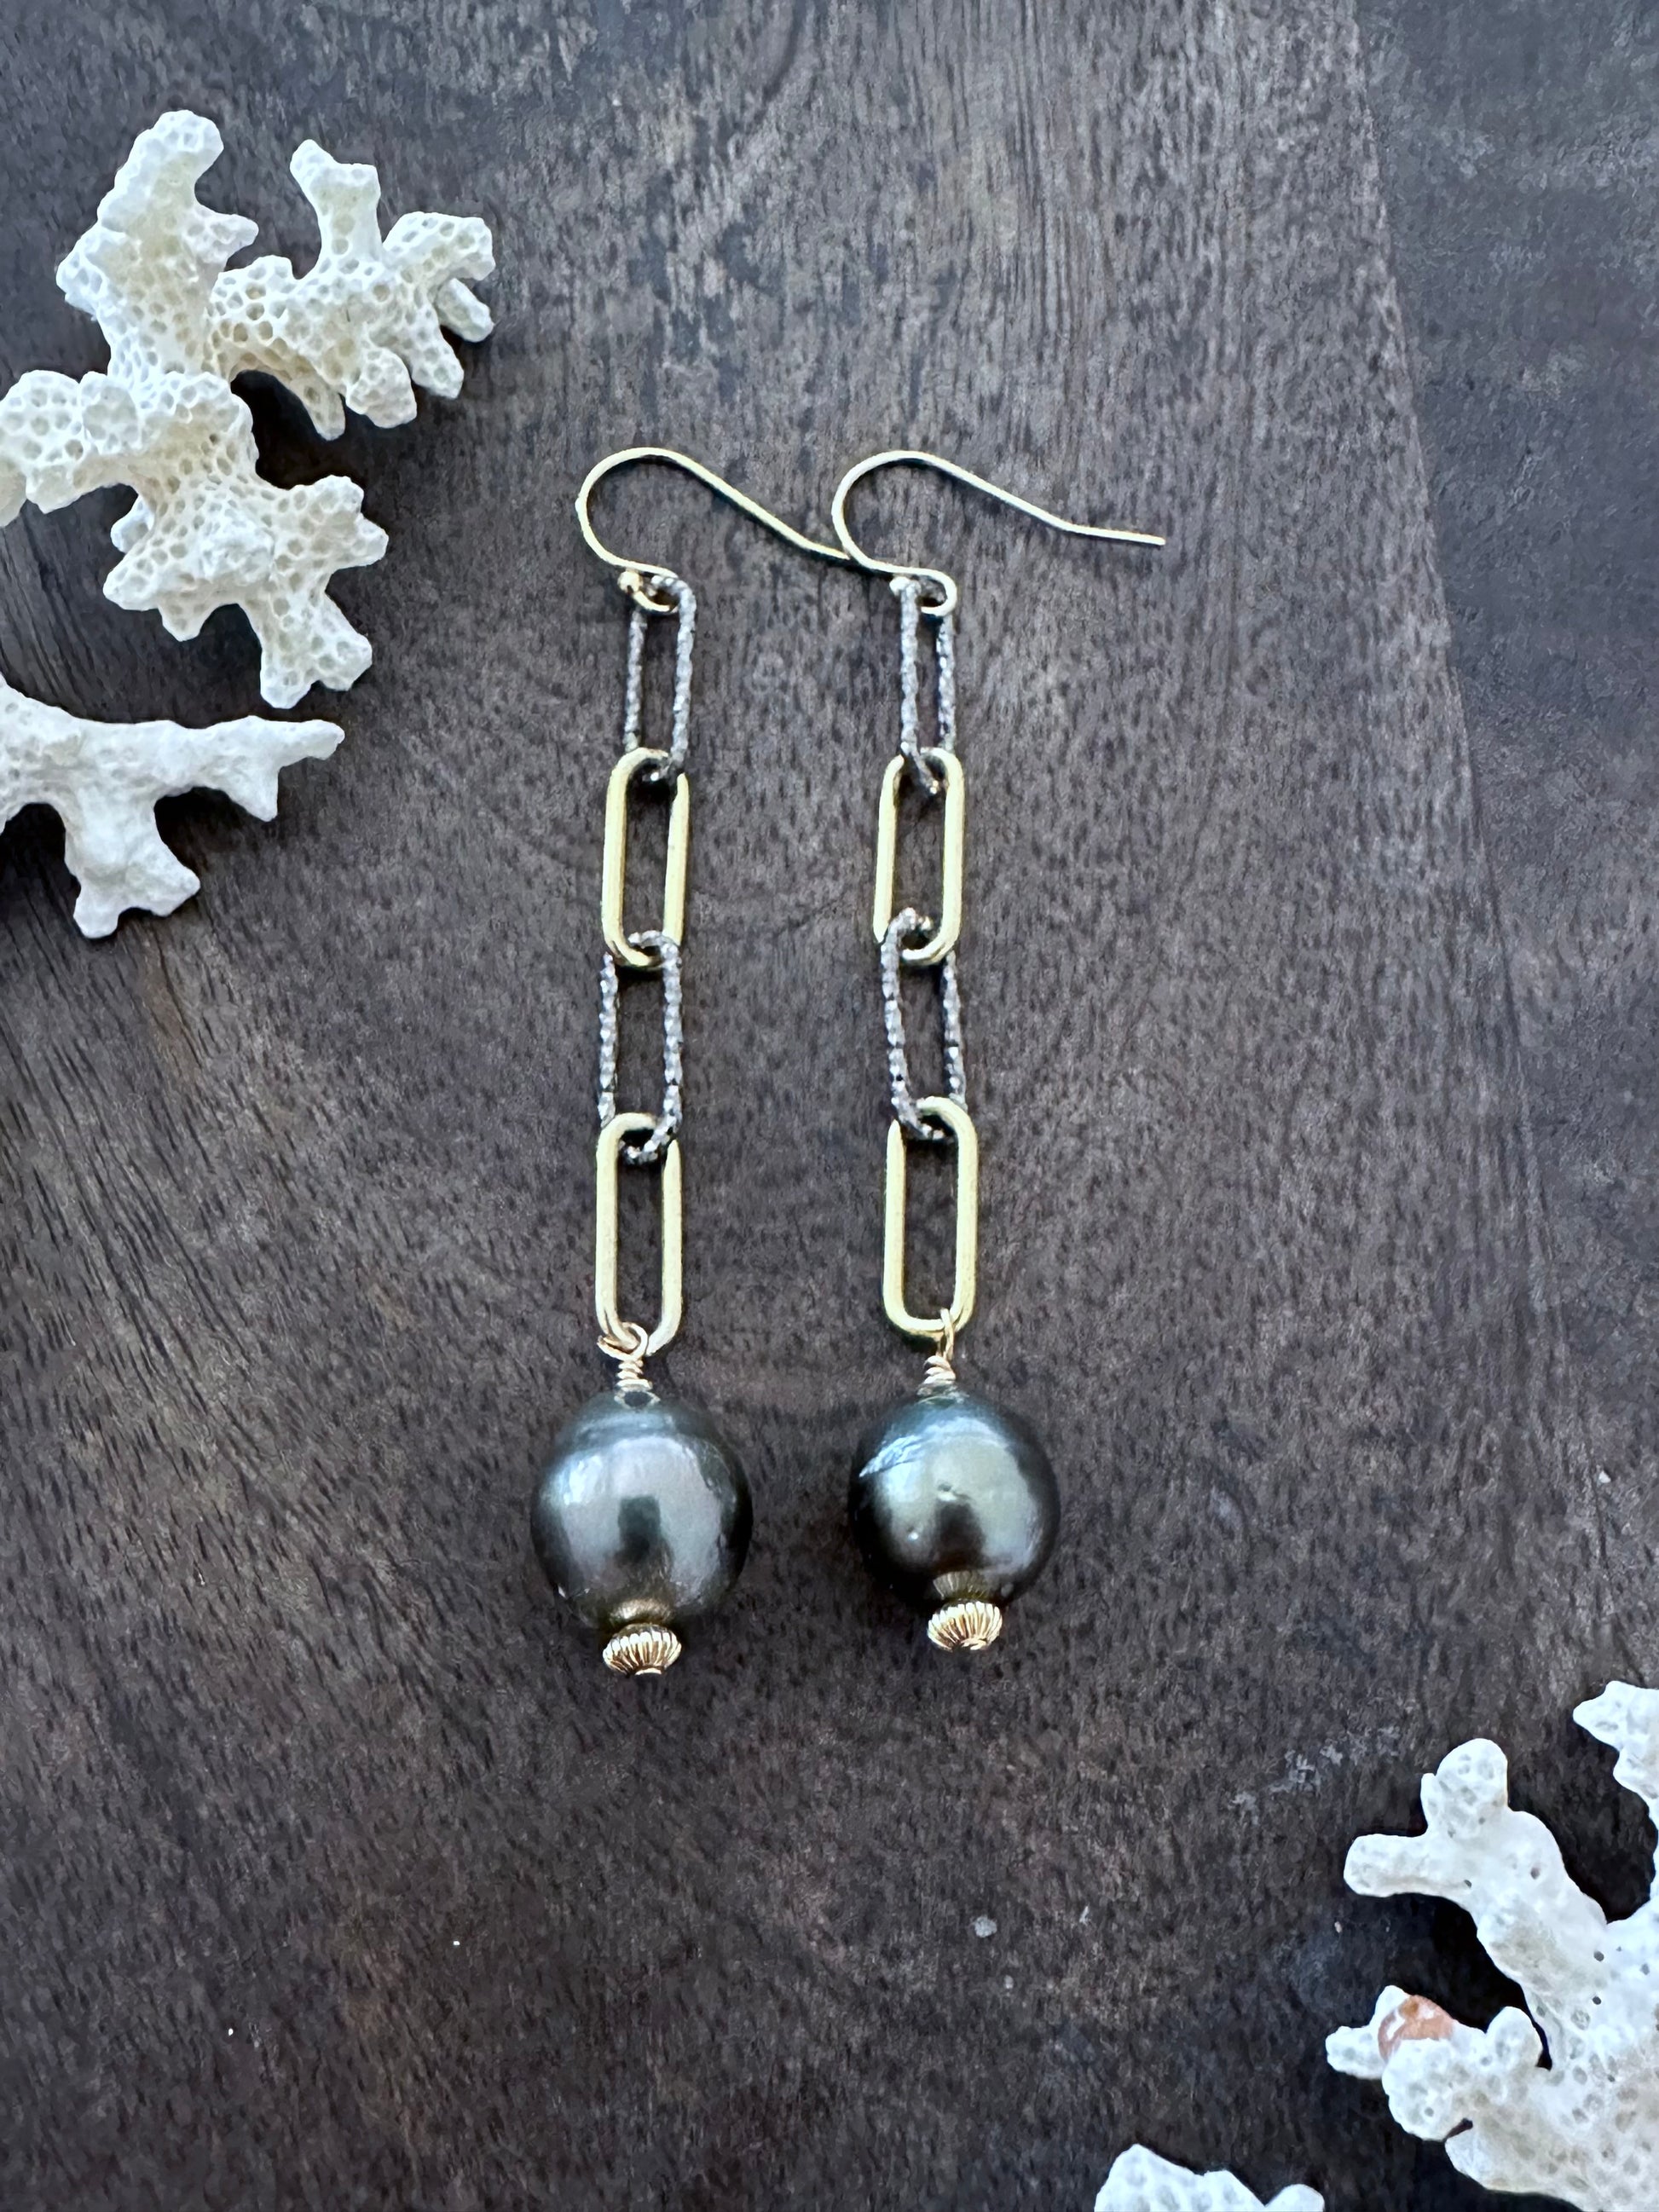 a pair of earrings on a grey wooden back ground. they are alternating links of silver and gold with a singel tahtian black pearl at the bottom. there are white coral pieces inthe upper left and lower right corners of the image